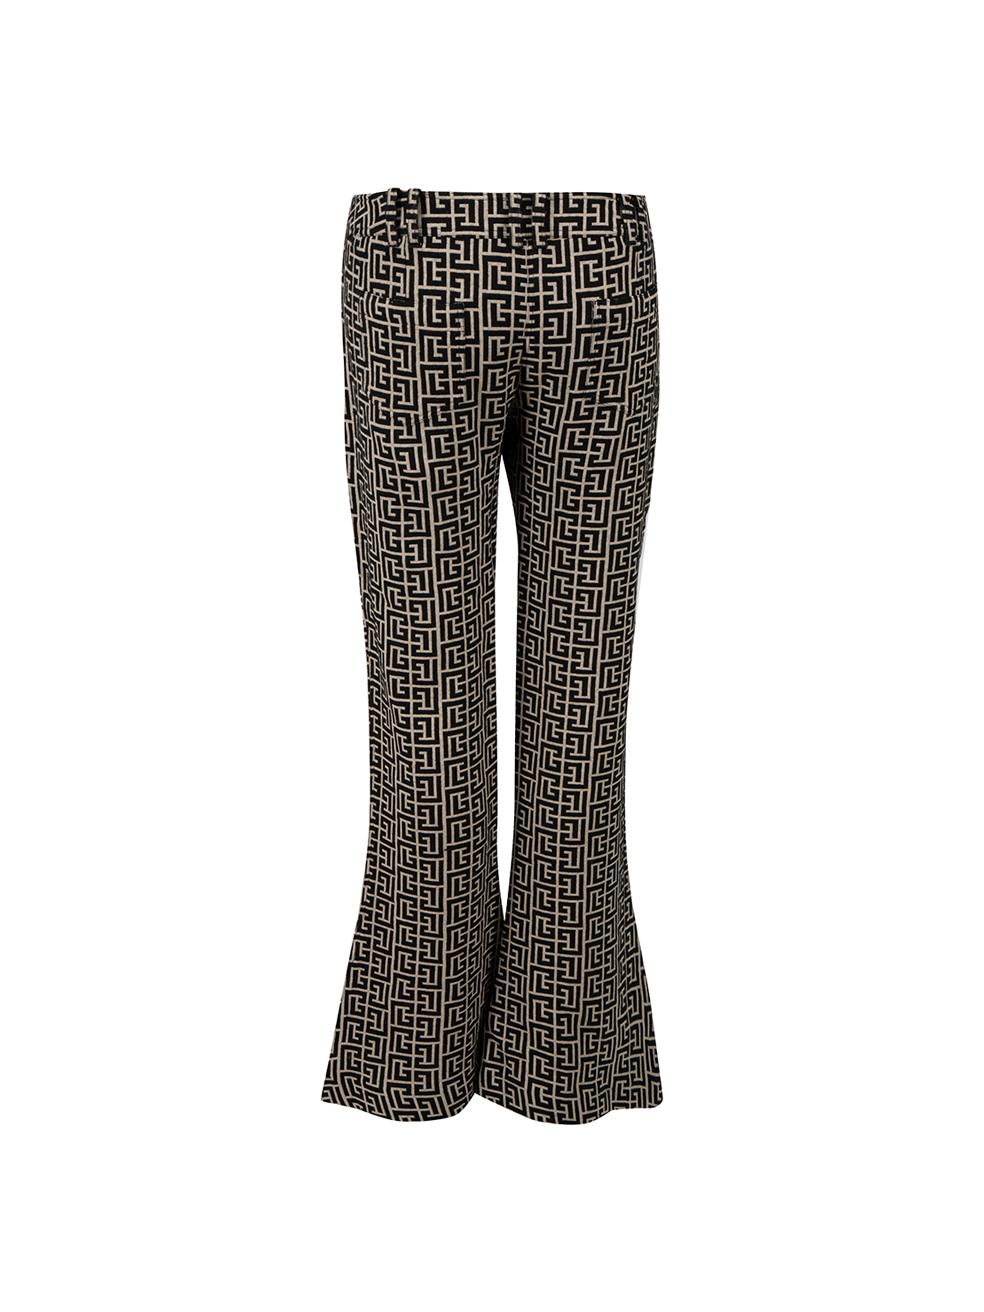 Balmain Black Logo Patterned Flared Trousers Size XL In Good Condition For Sale In London, GB